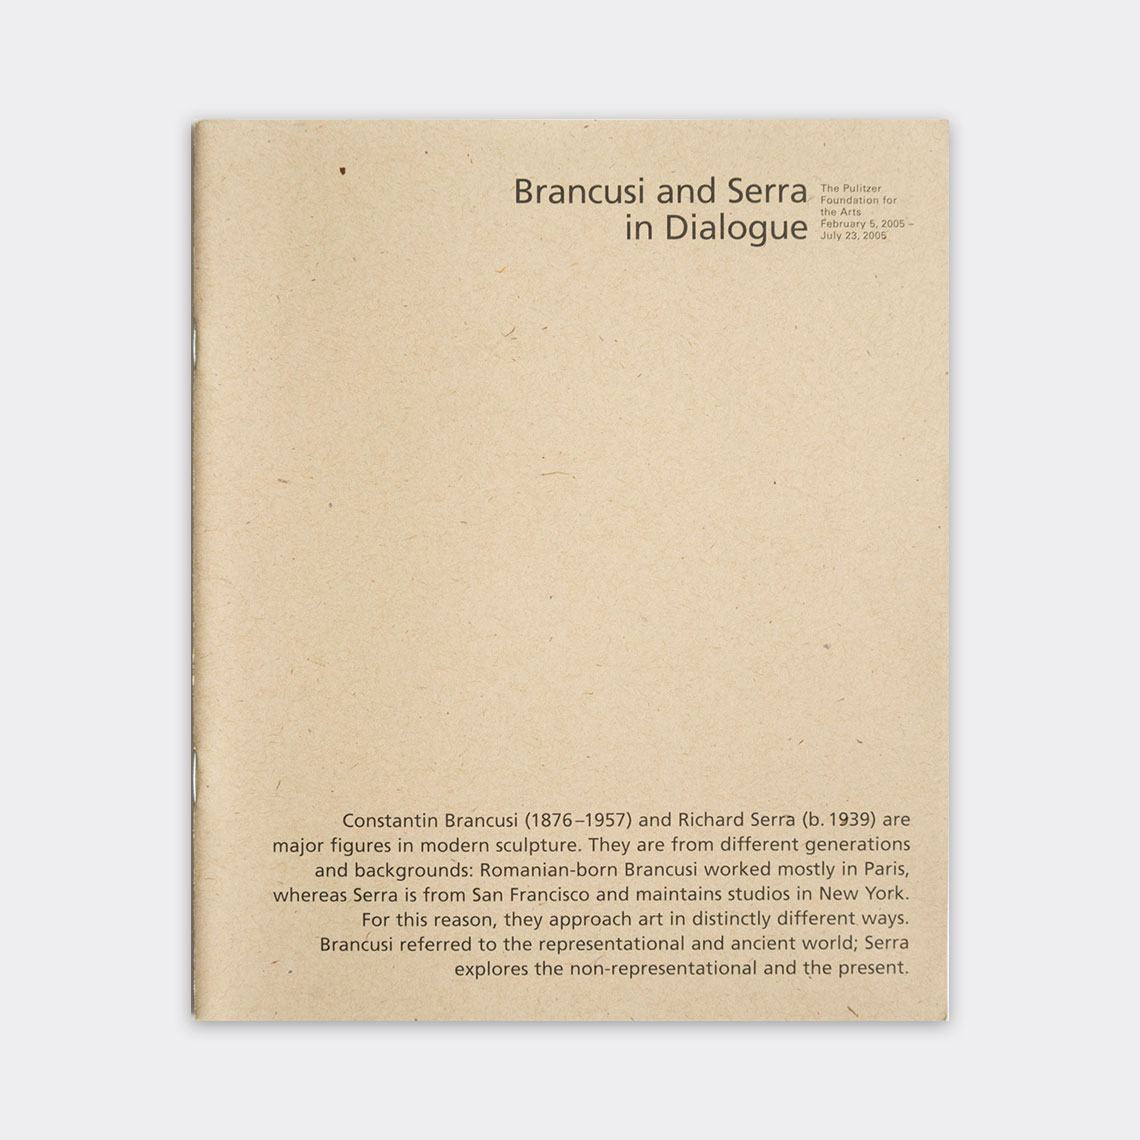 The exhibition catalogue cover for "Brancusi and Serra in Dialogue."